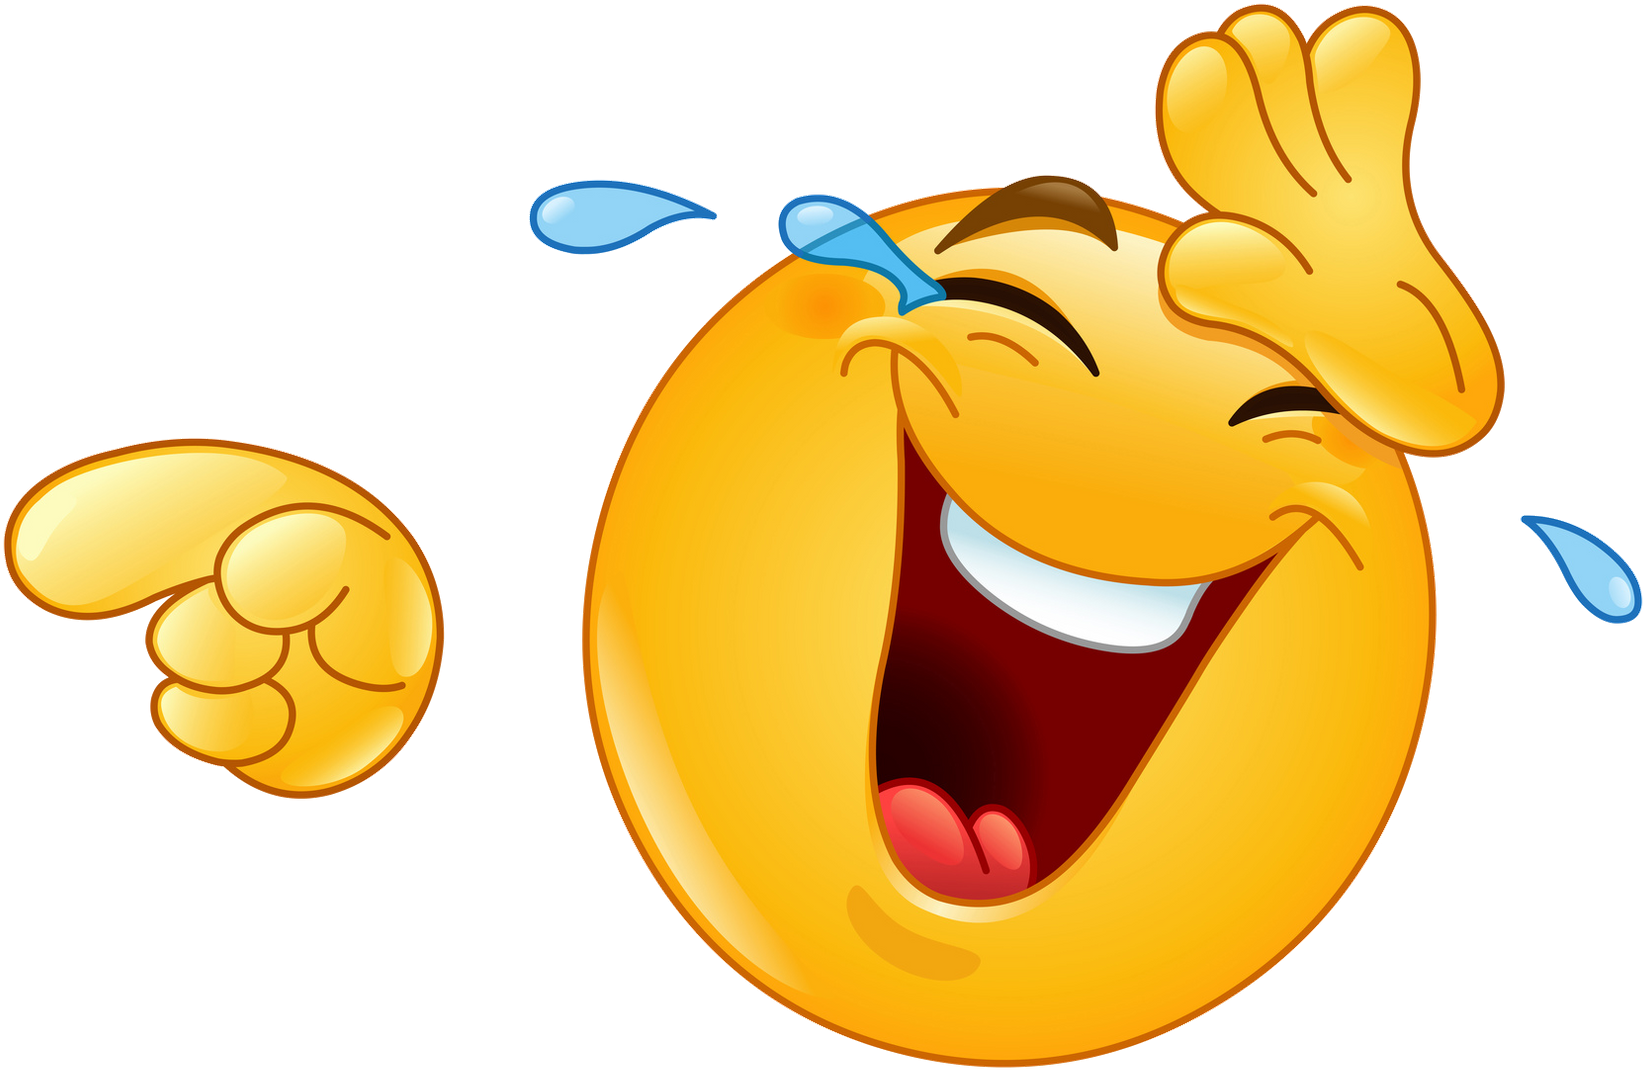 Download Smiley Lol Emoticon Laughter Clip Art Laughing